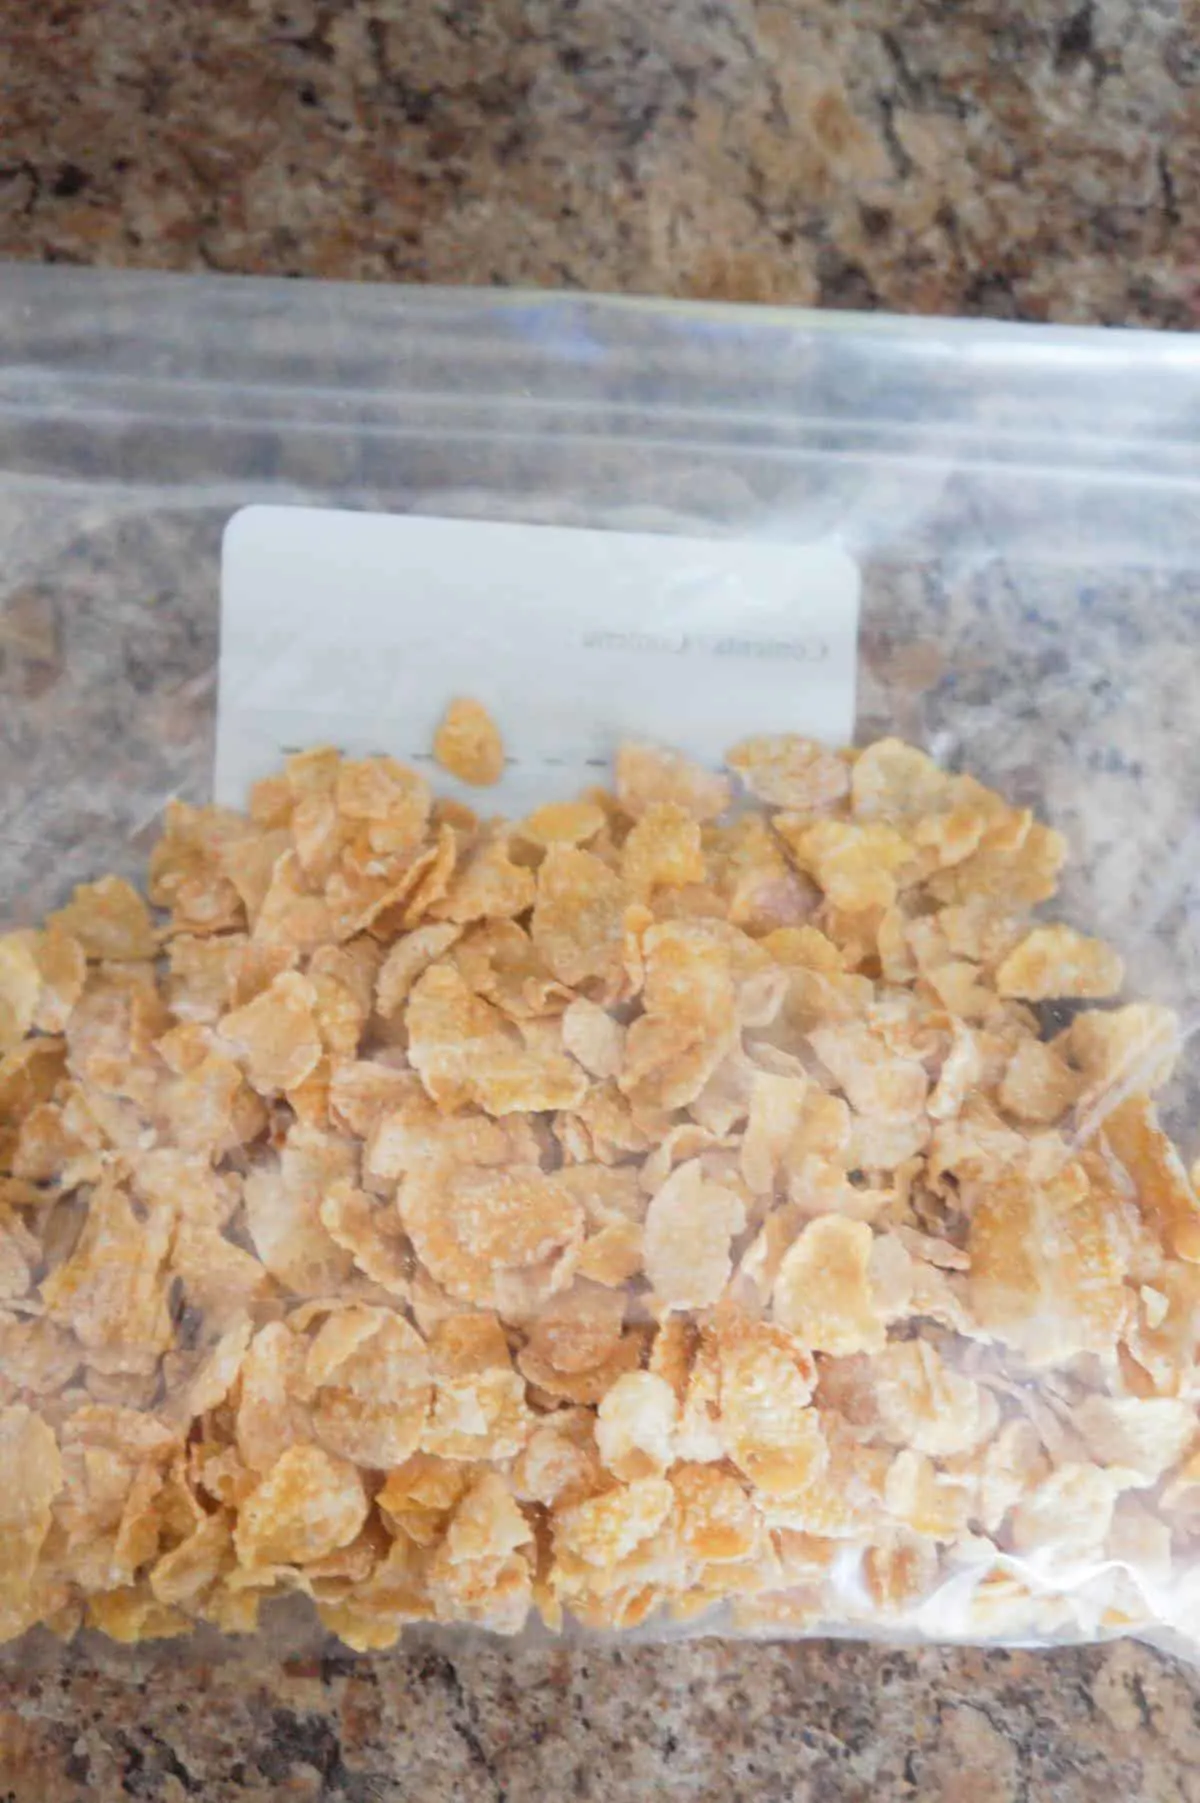 Frosted Flakes in a Ziploc bag